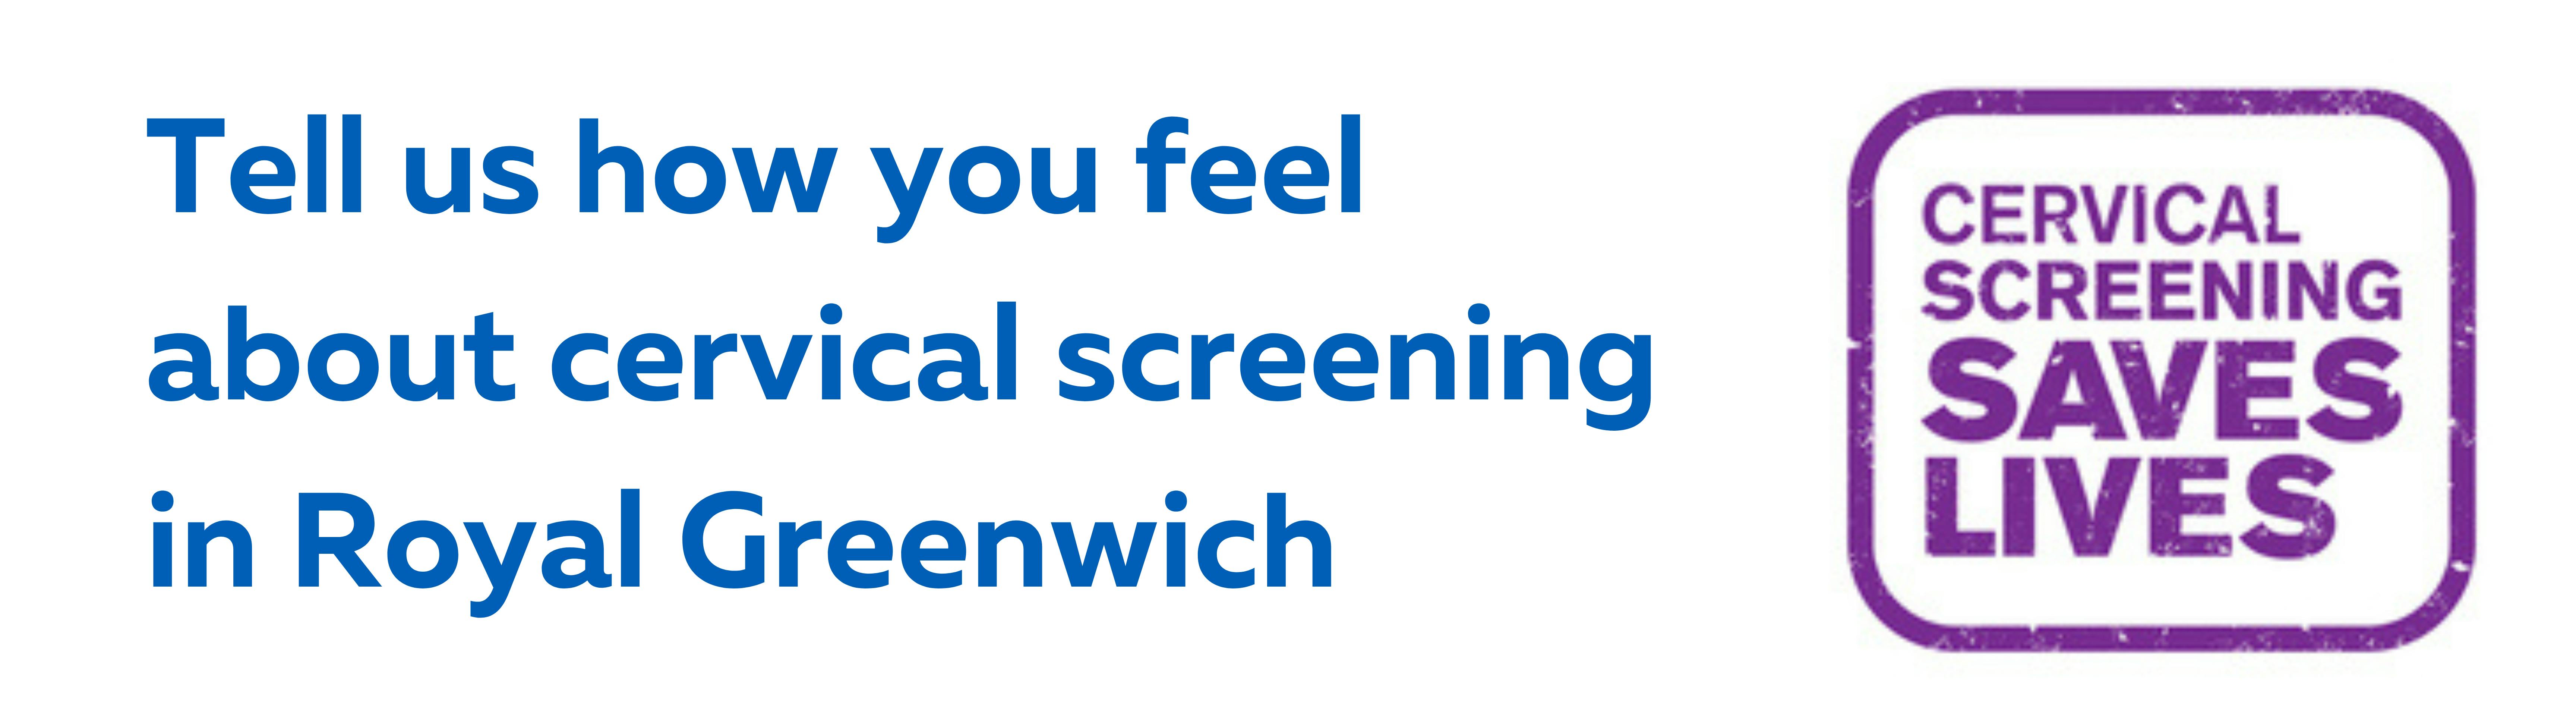 Tell us how you feel about cervical screening in Royal Greenwich